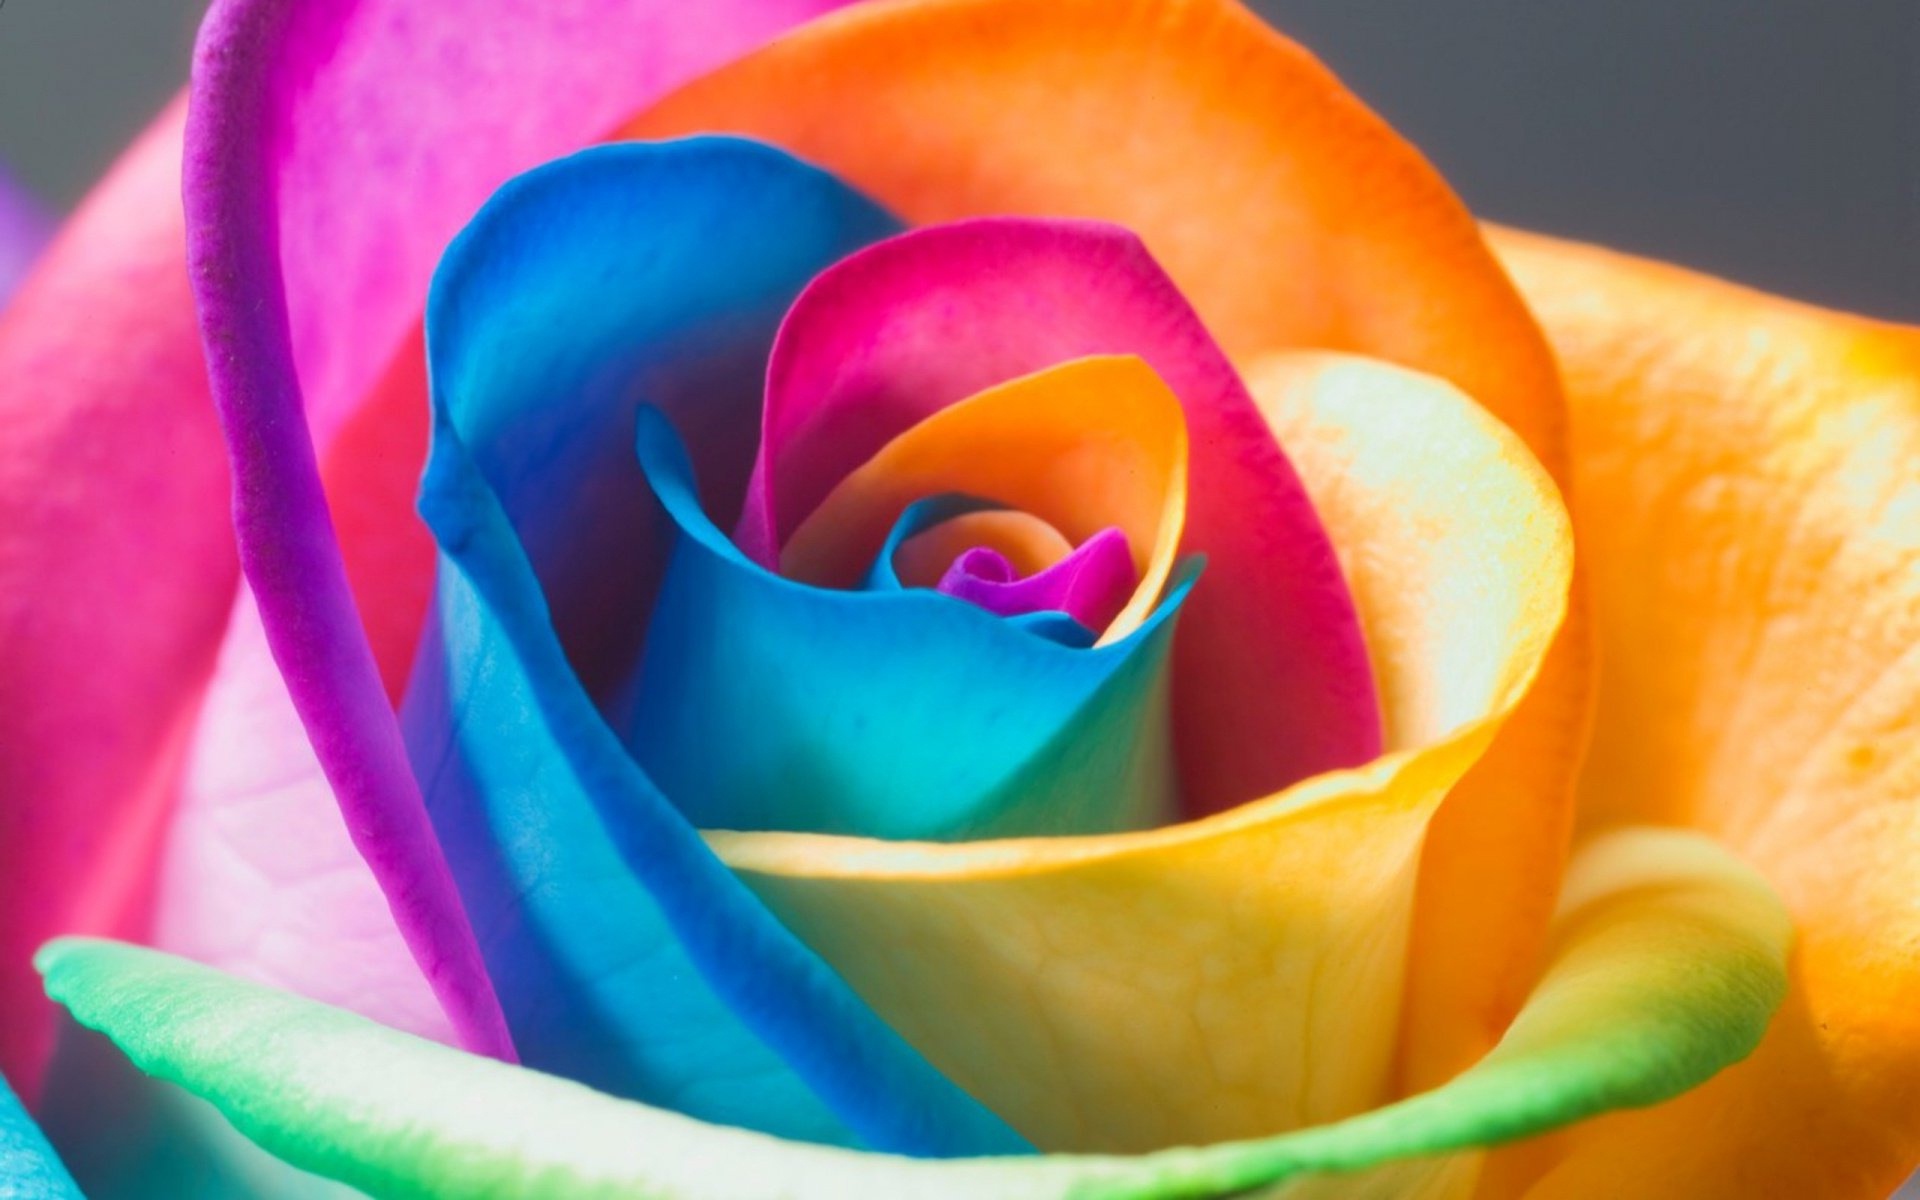 Rainbow Flower Photos HD Wallpaper Image Pictures